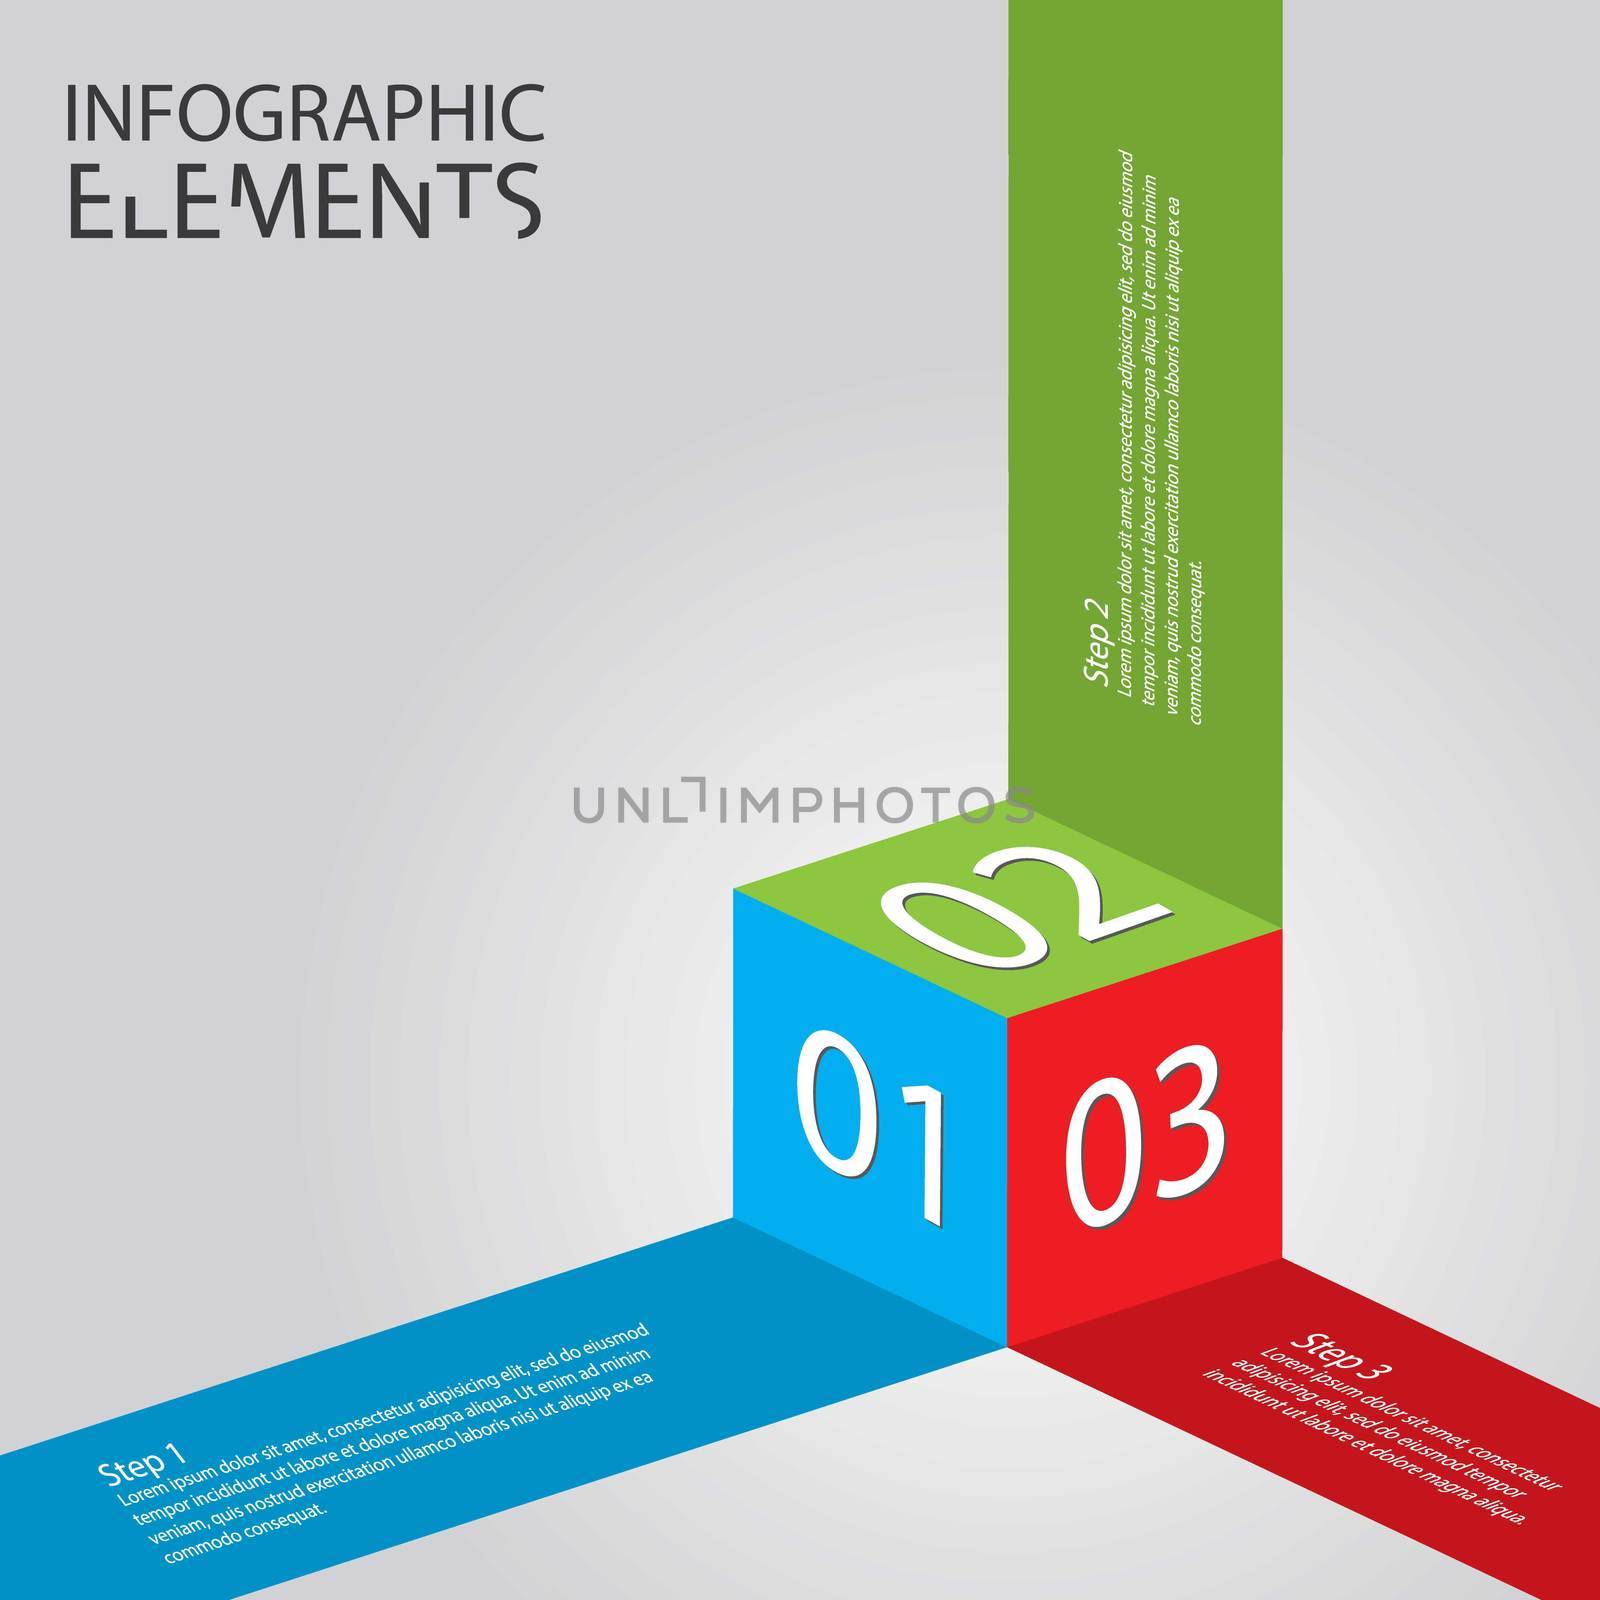 An Illustration of Modern infographic chart